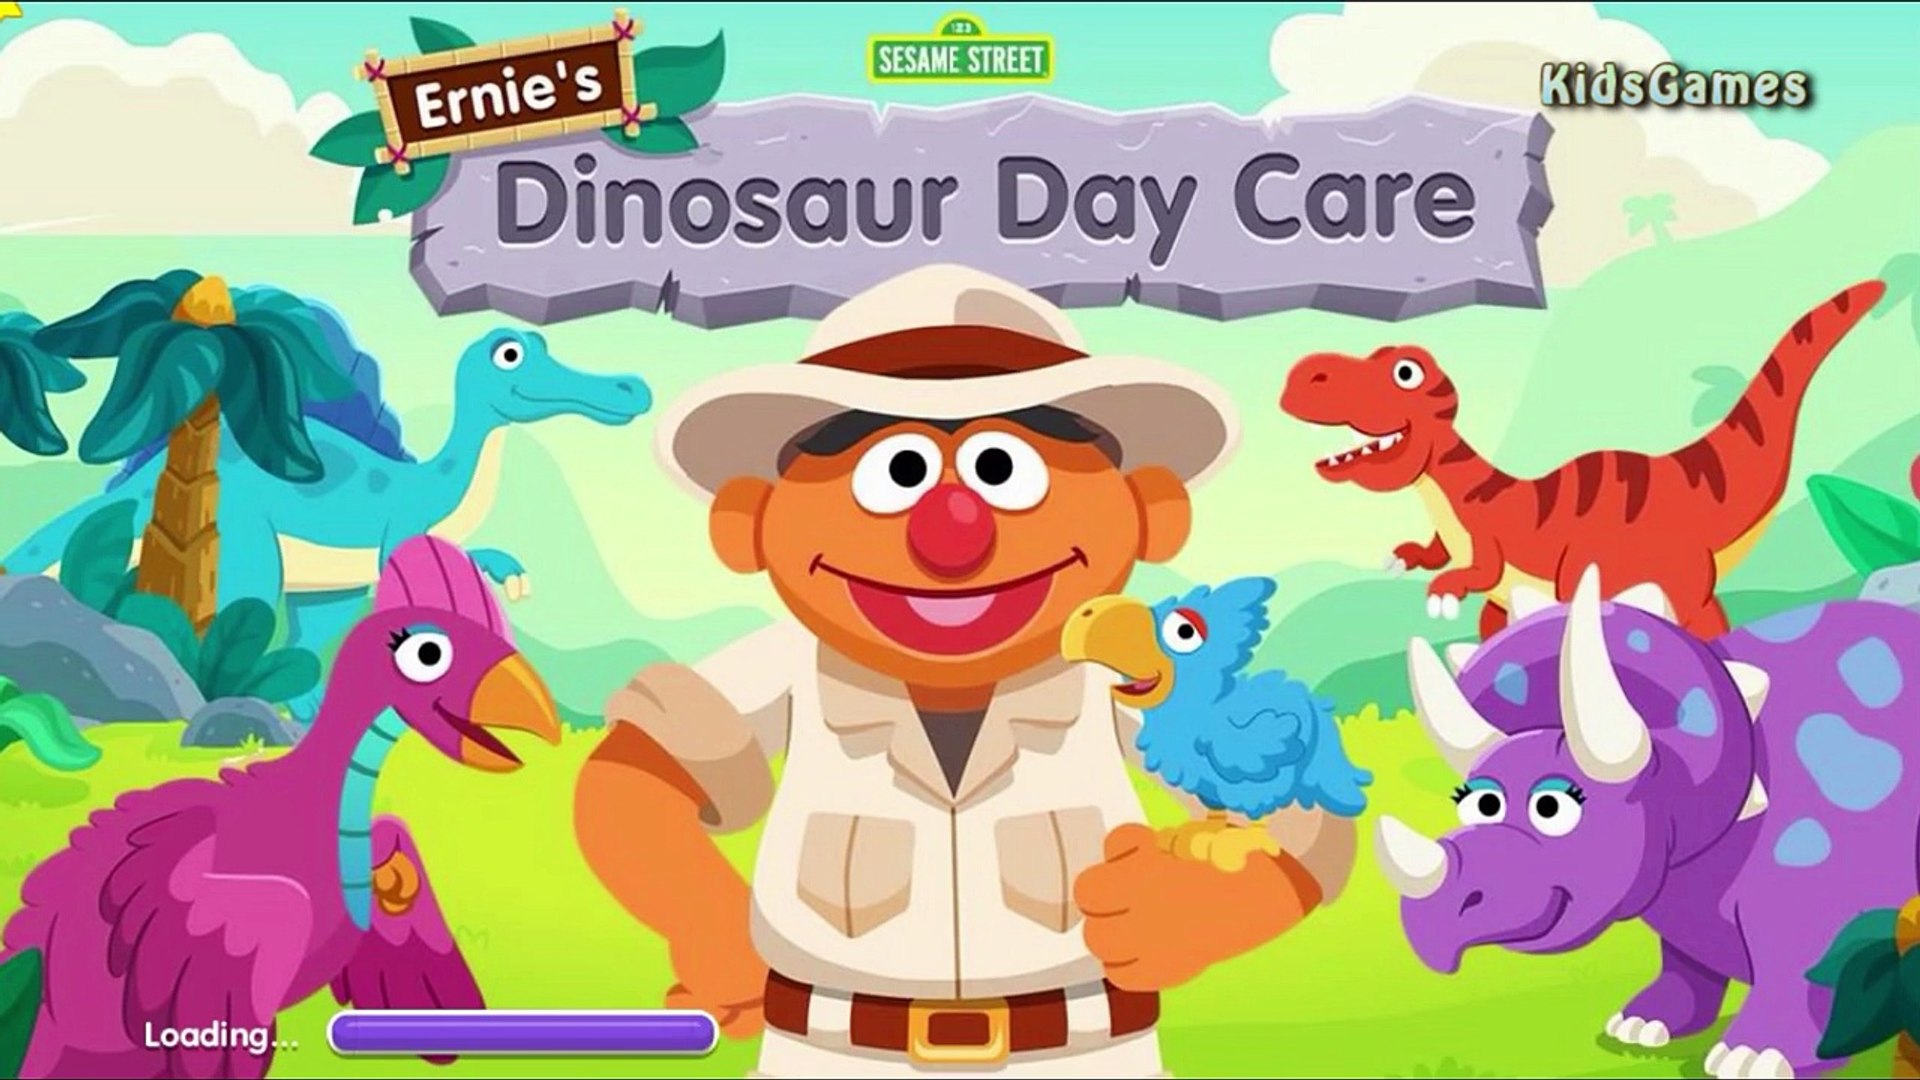 Dinosaur Day Care Fun Video for Kids Education Game